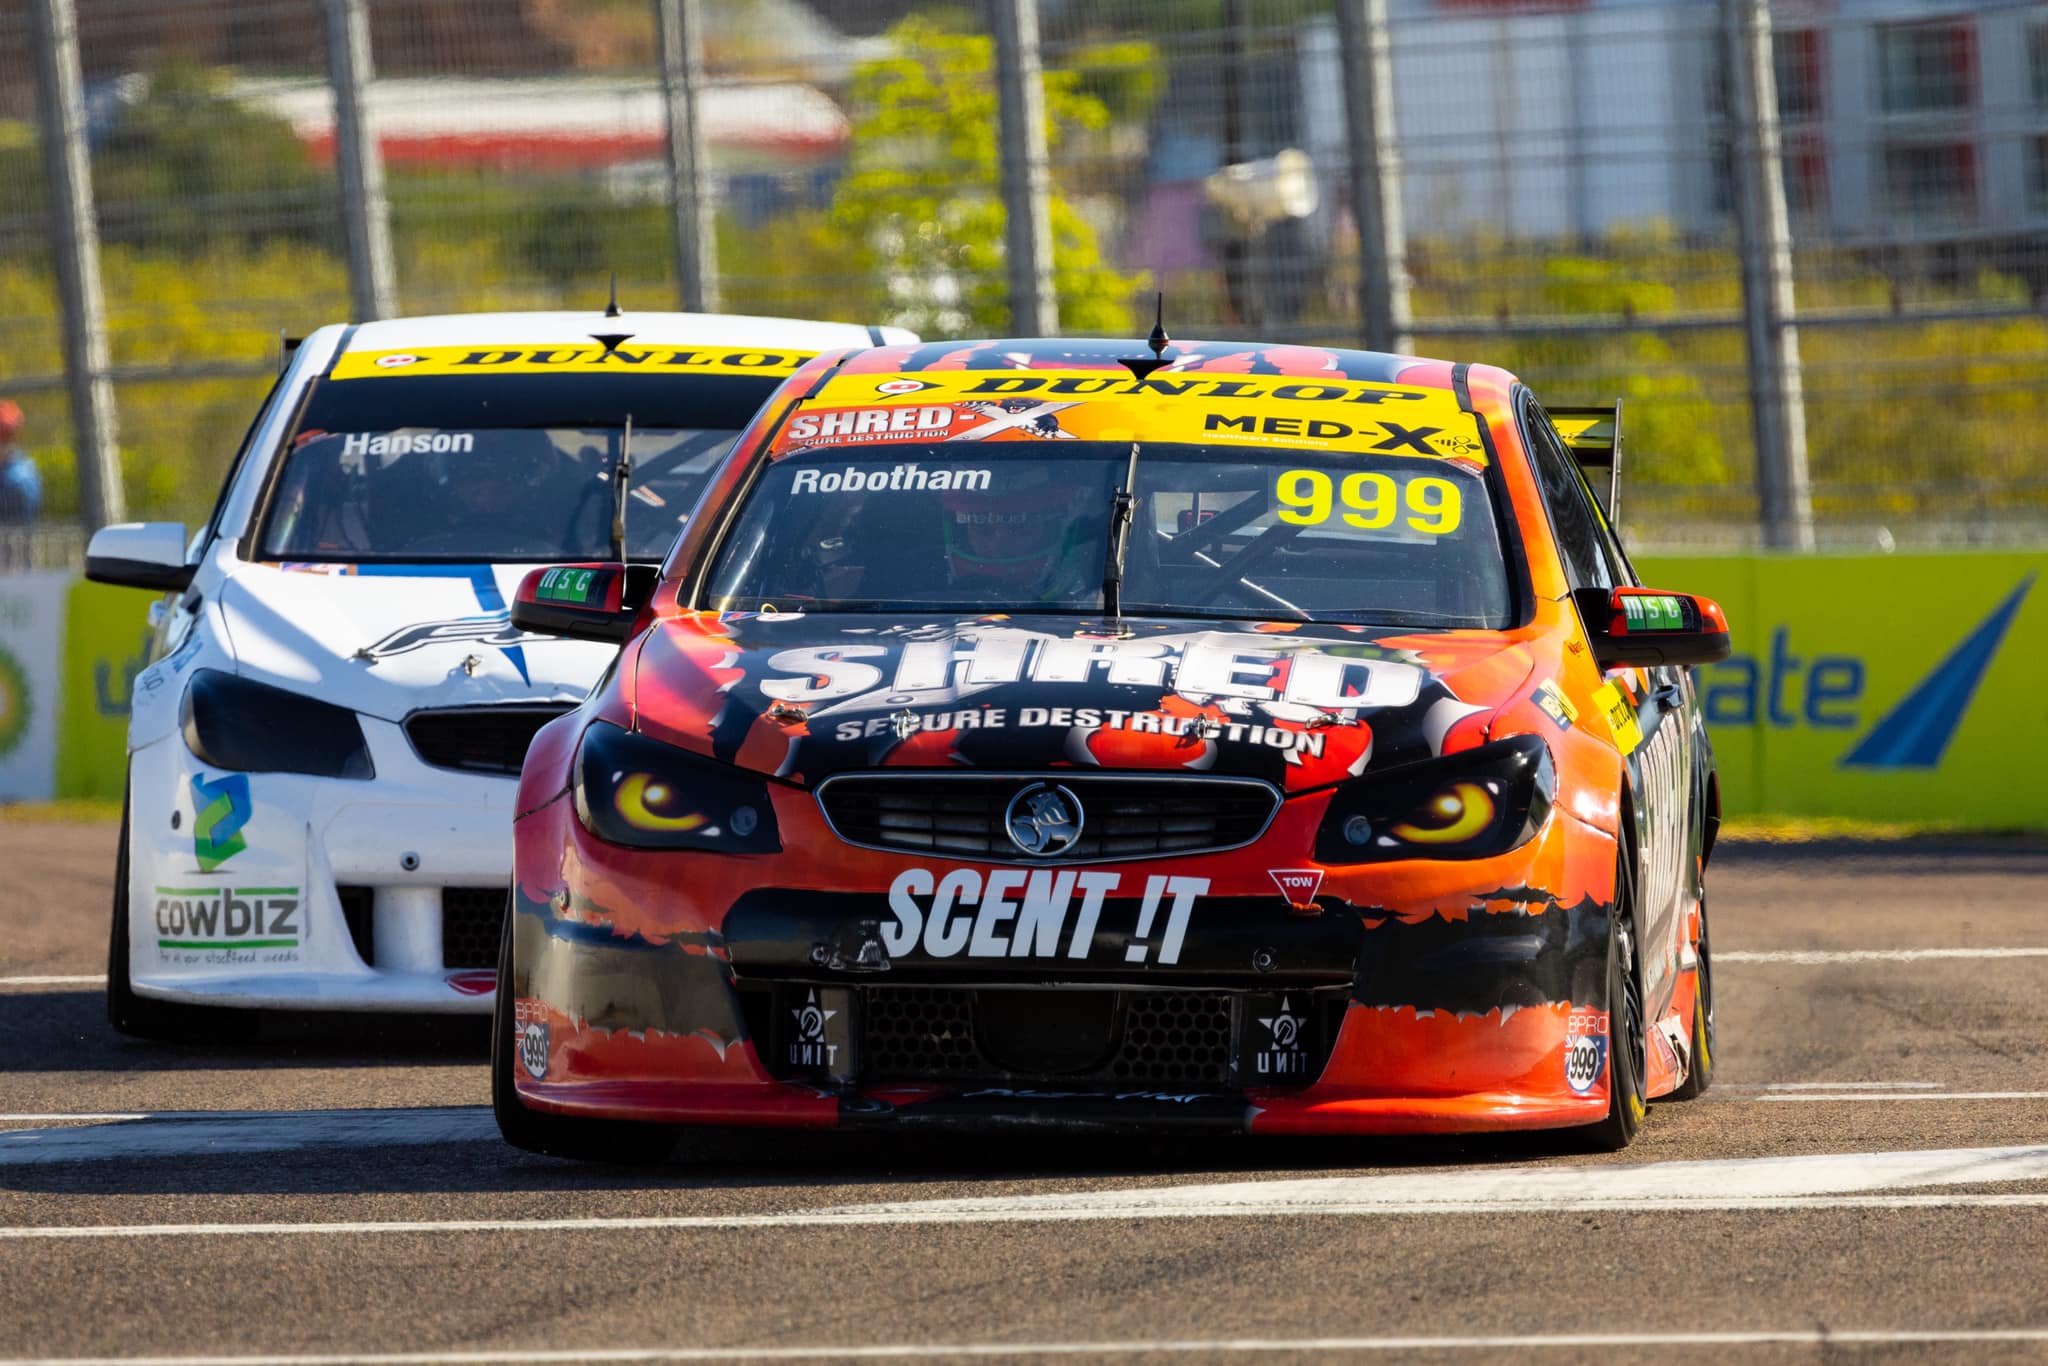 Jaylyn Robotham is in his second season of the Supercars feeder, Super2 Series with Image Racing